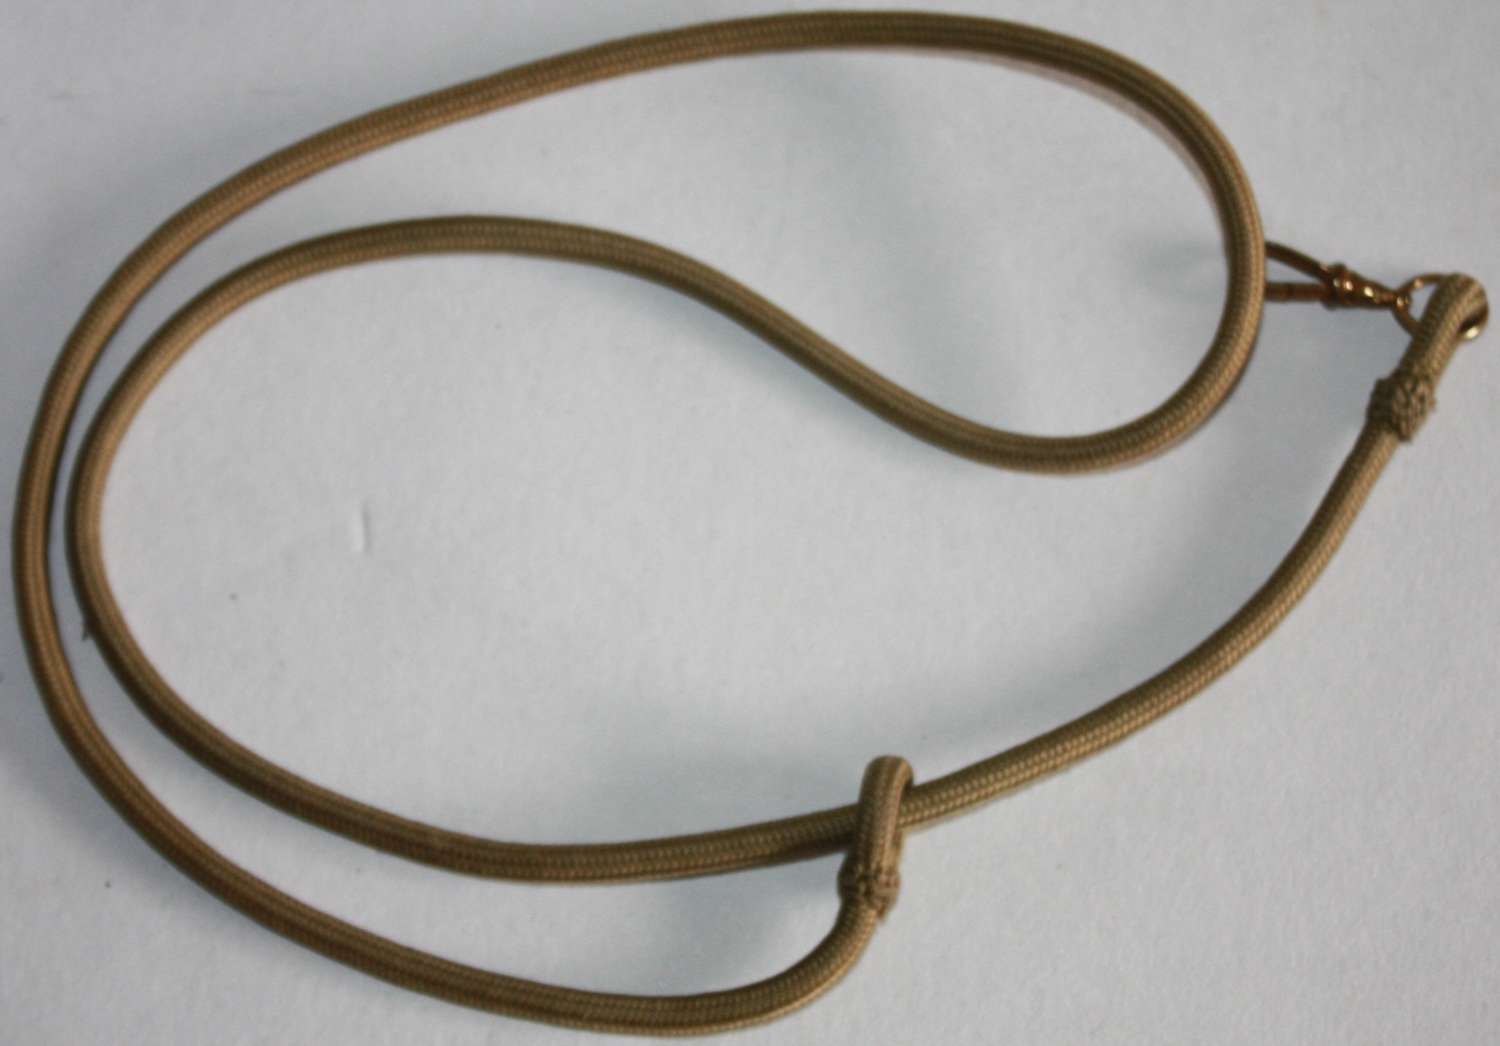 A GOOD WWI / WWII OFFICERS WHISTLE LANYARD